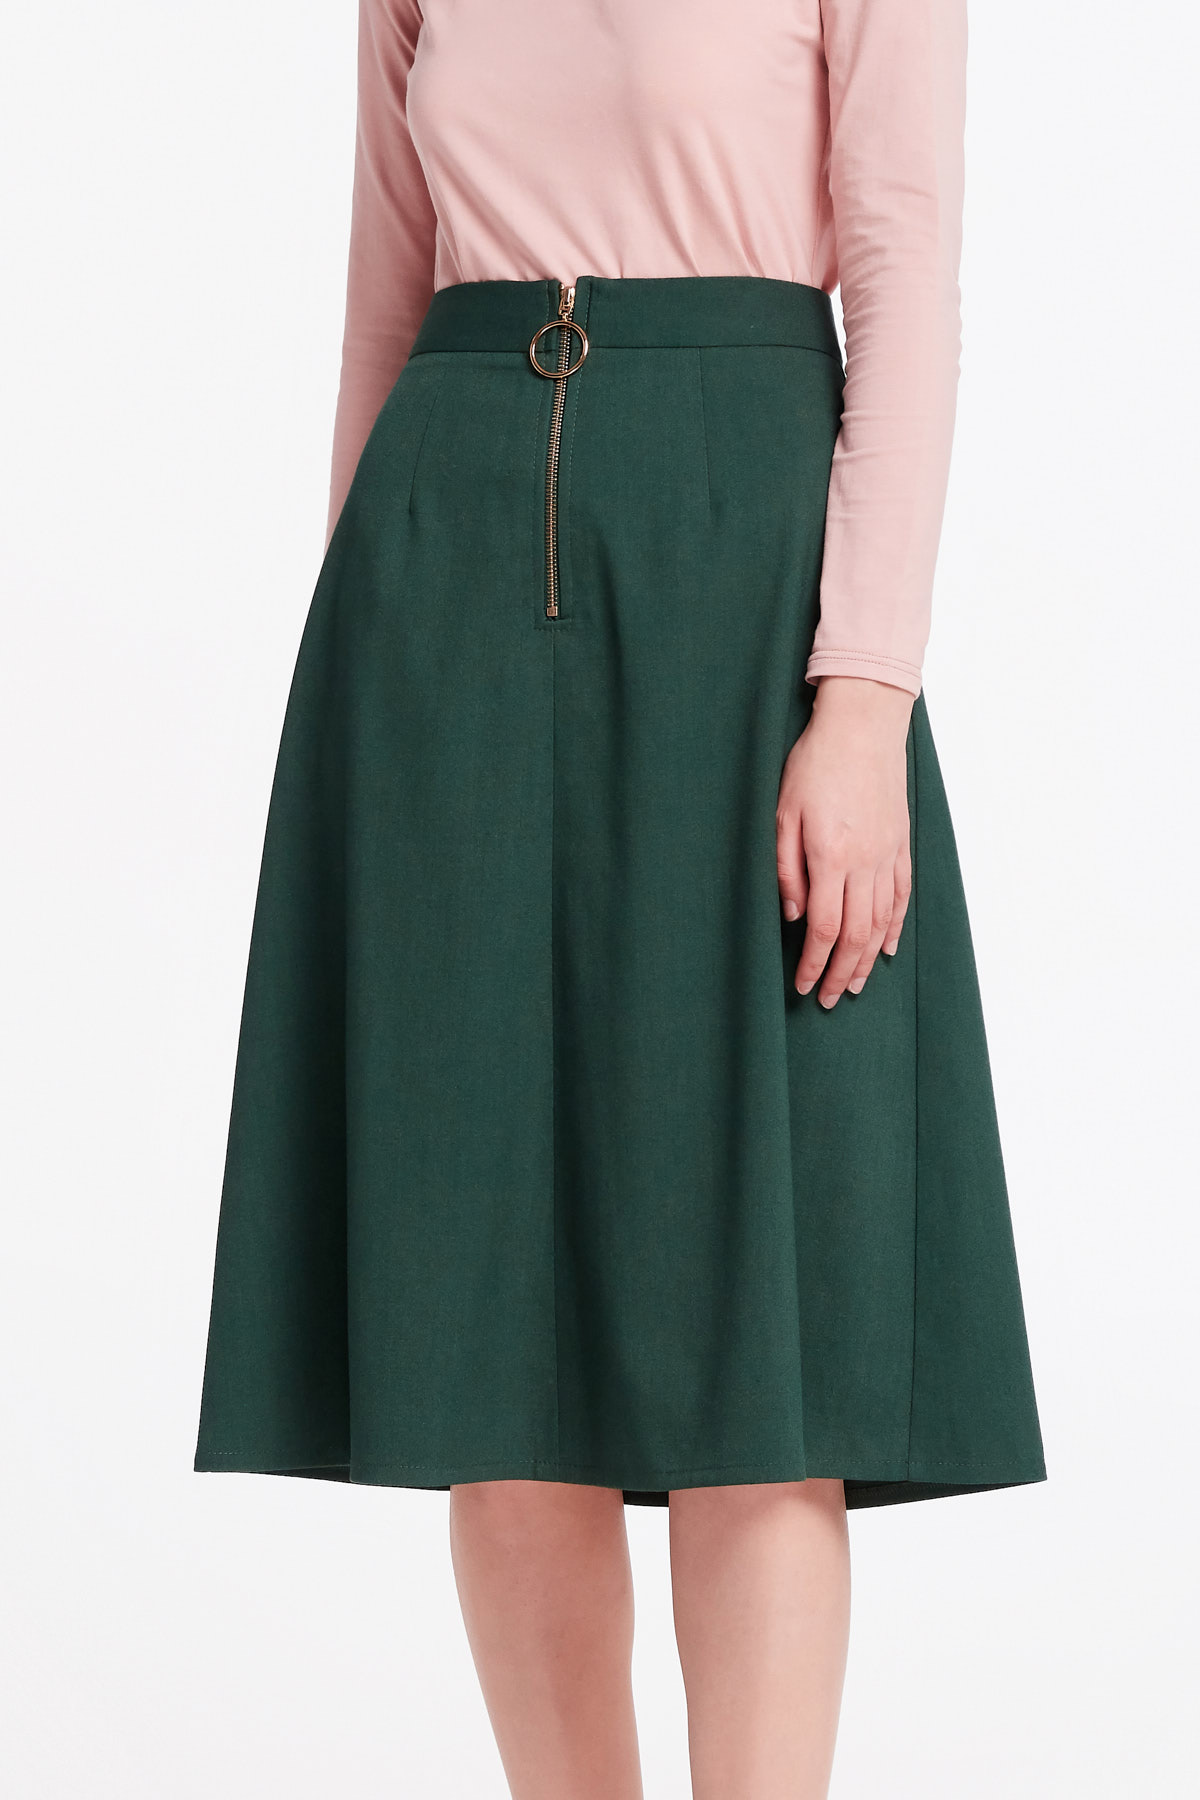 Green midi dress with a front zip, photo 2